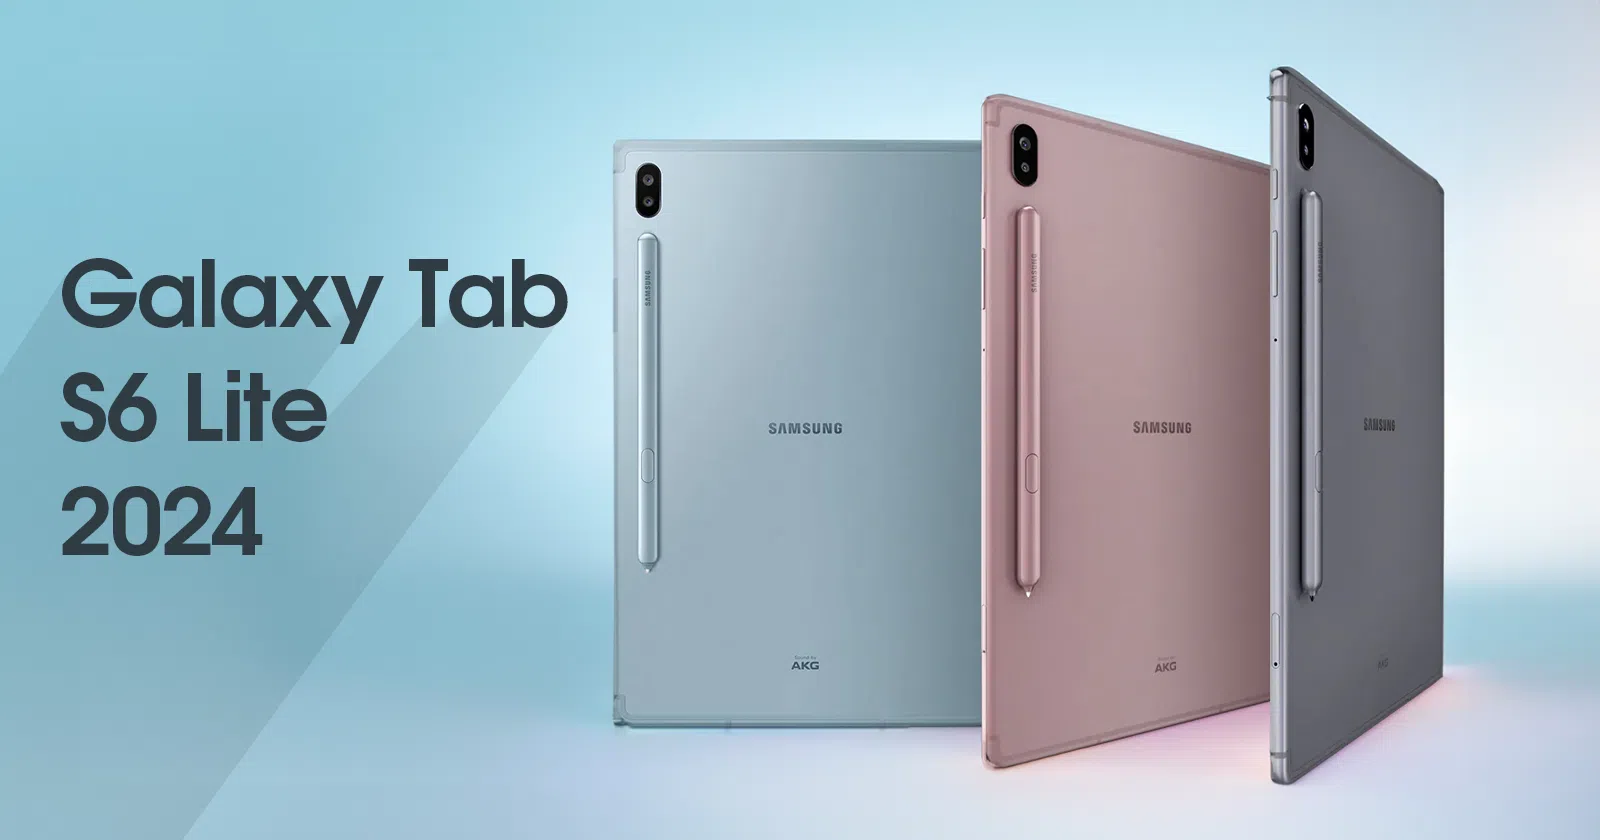 Samsung will re-release the Galaxy Tab S6 Lite in 2024